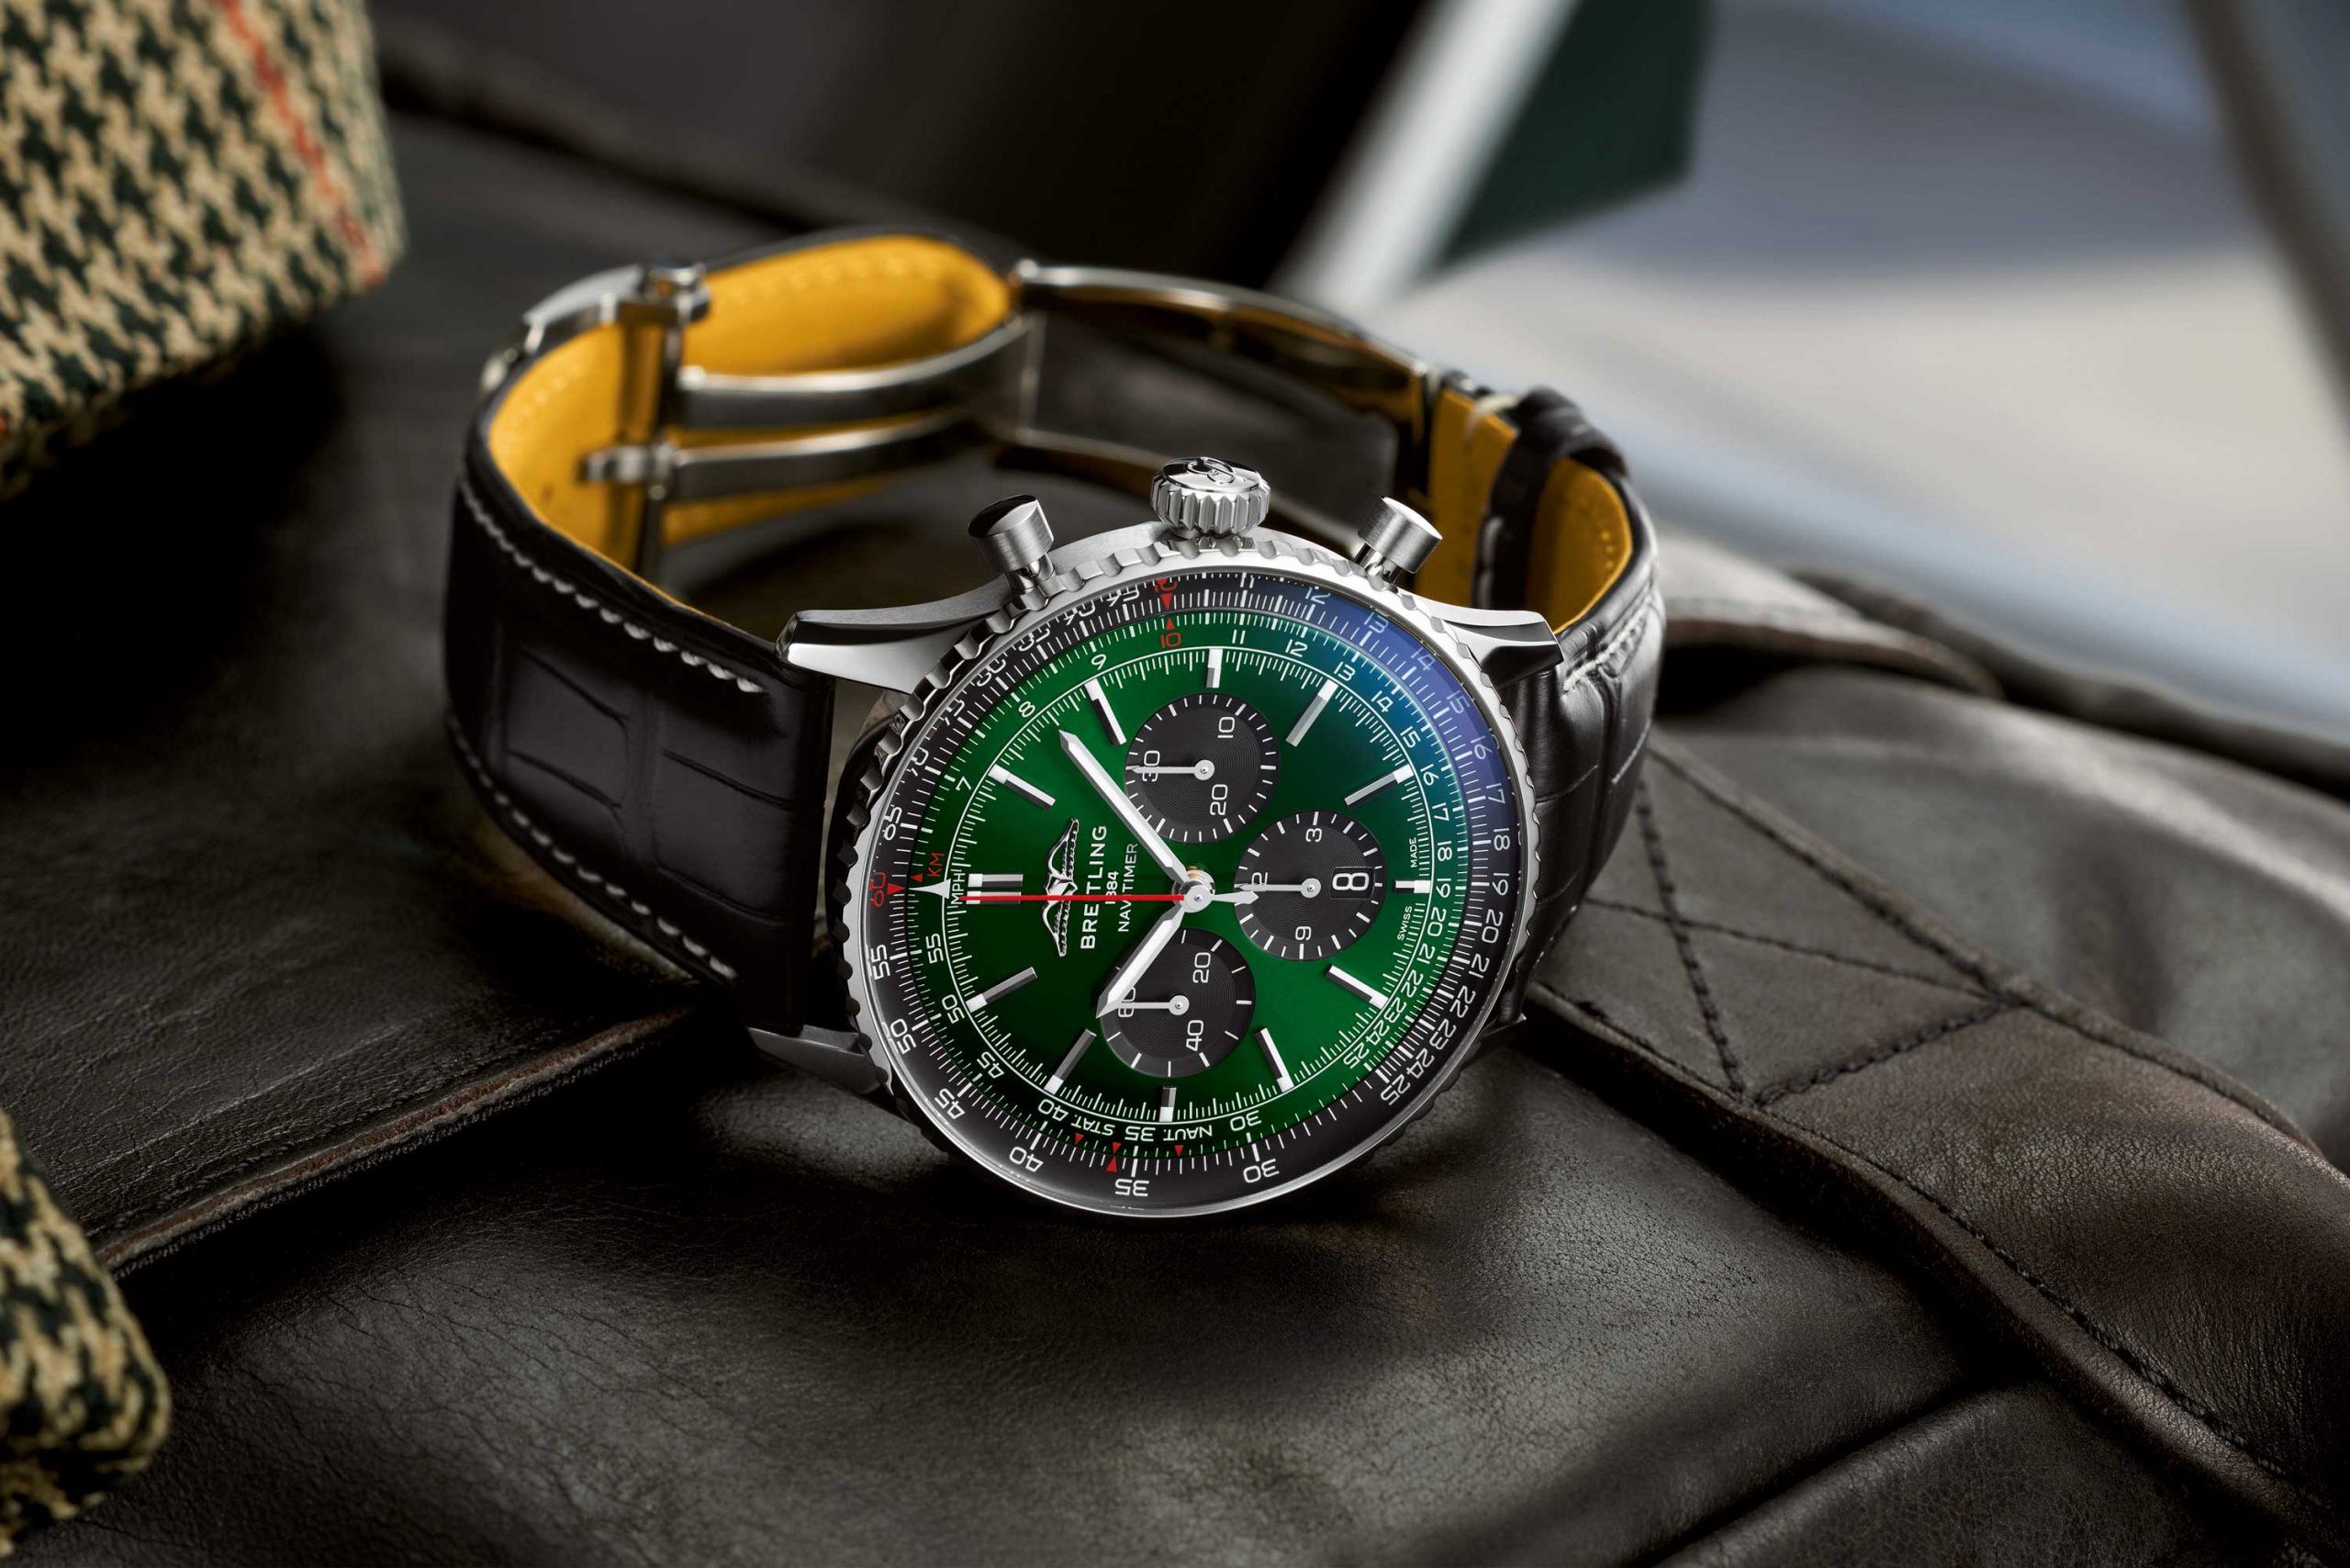 New Navitimer B01 Chronograph in 46mm with a deep green dial